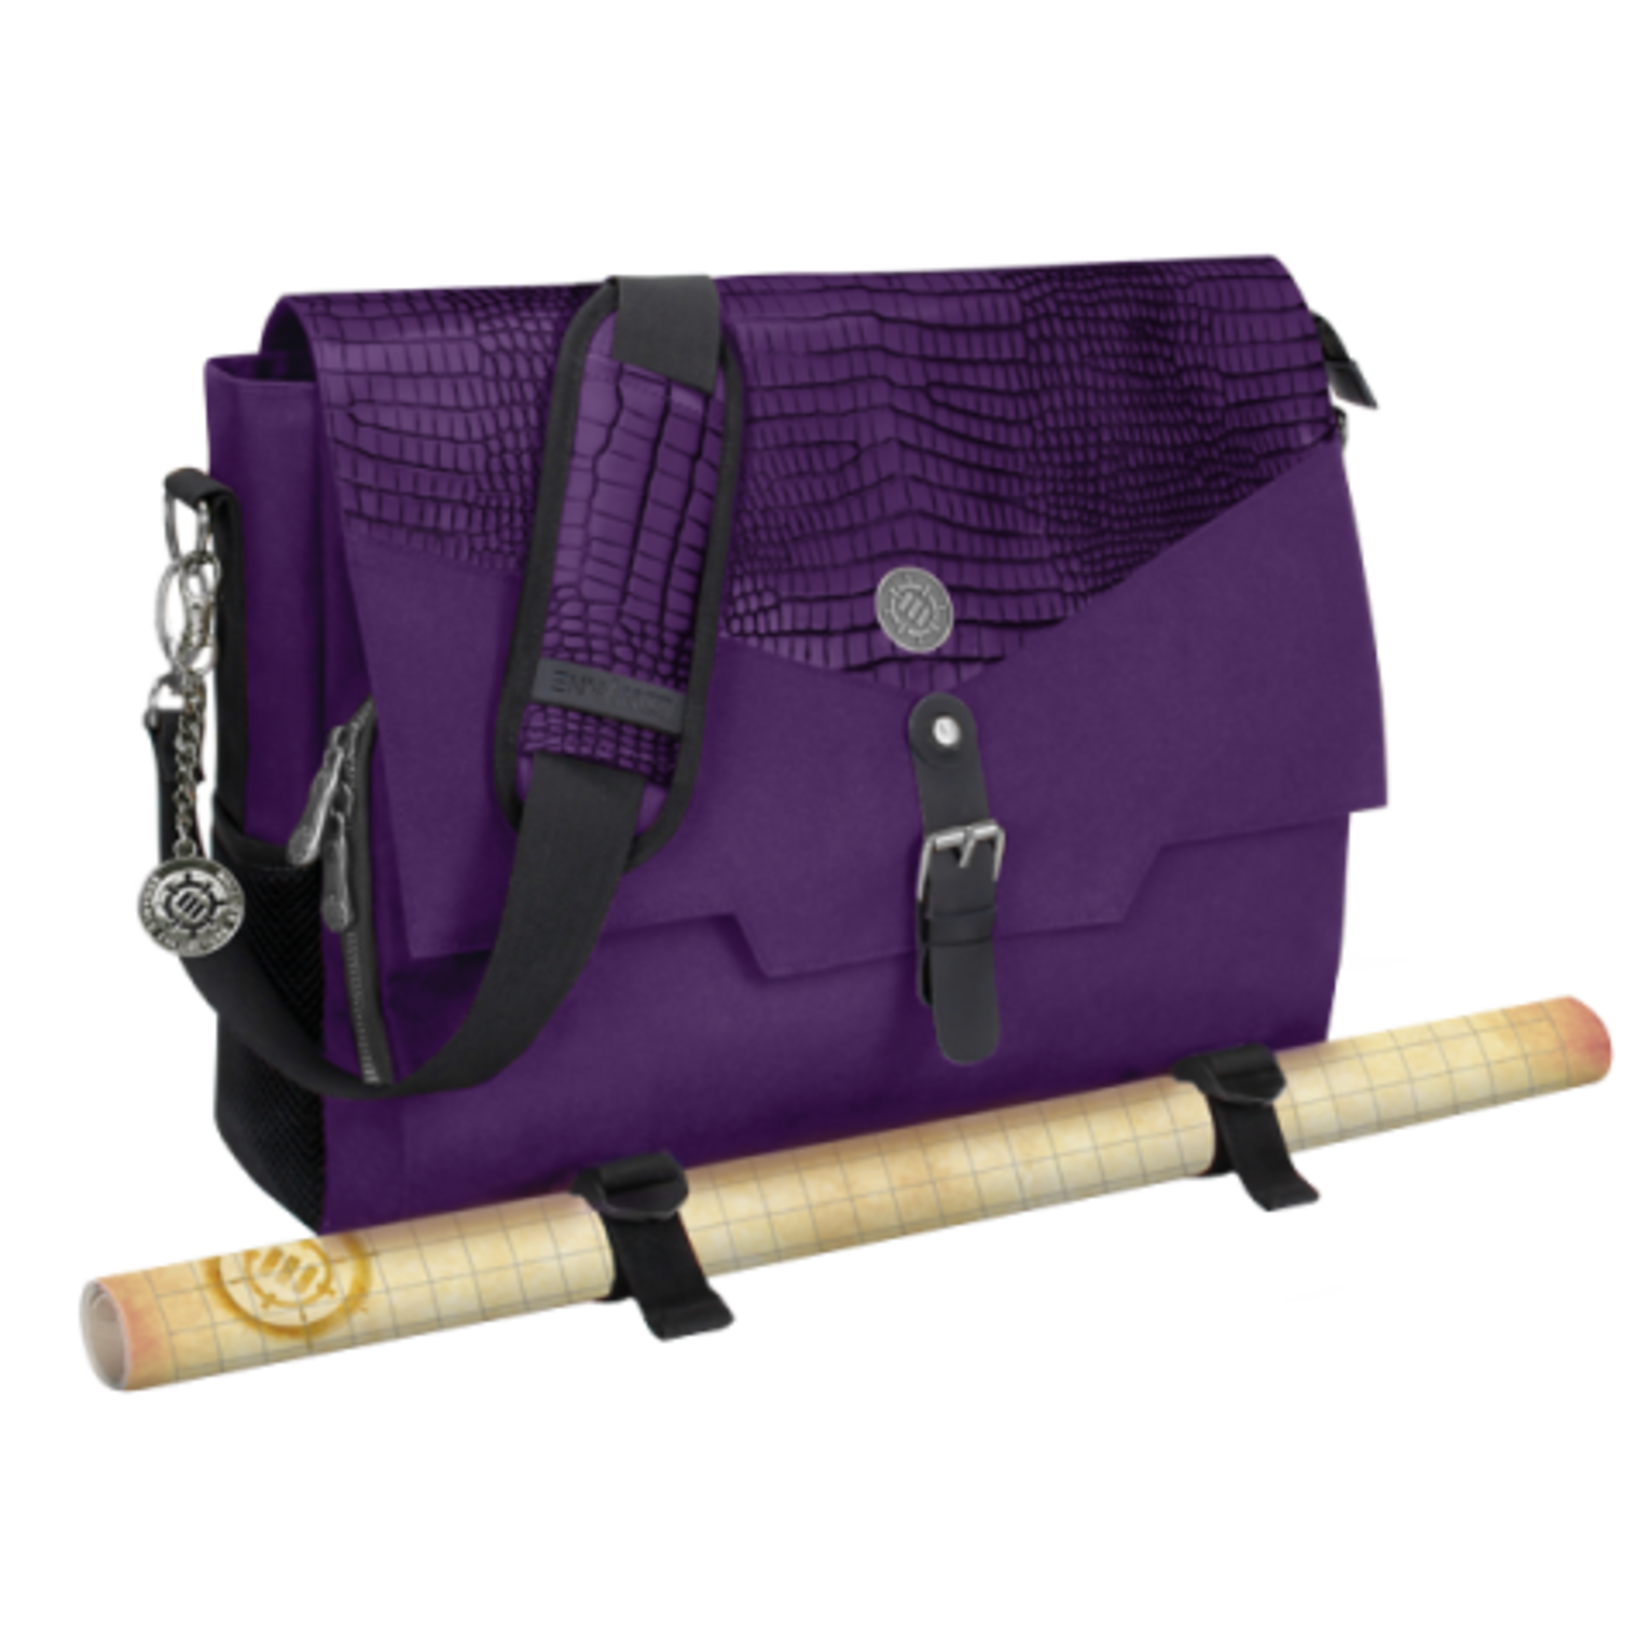 Accessory Power Enhance: RPG Player's Bag Collector's Edition